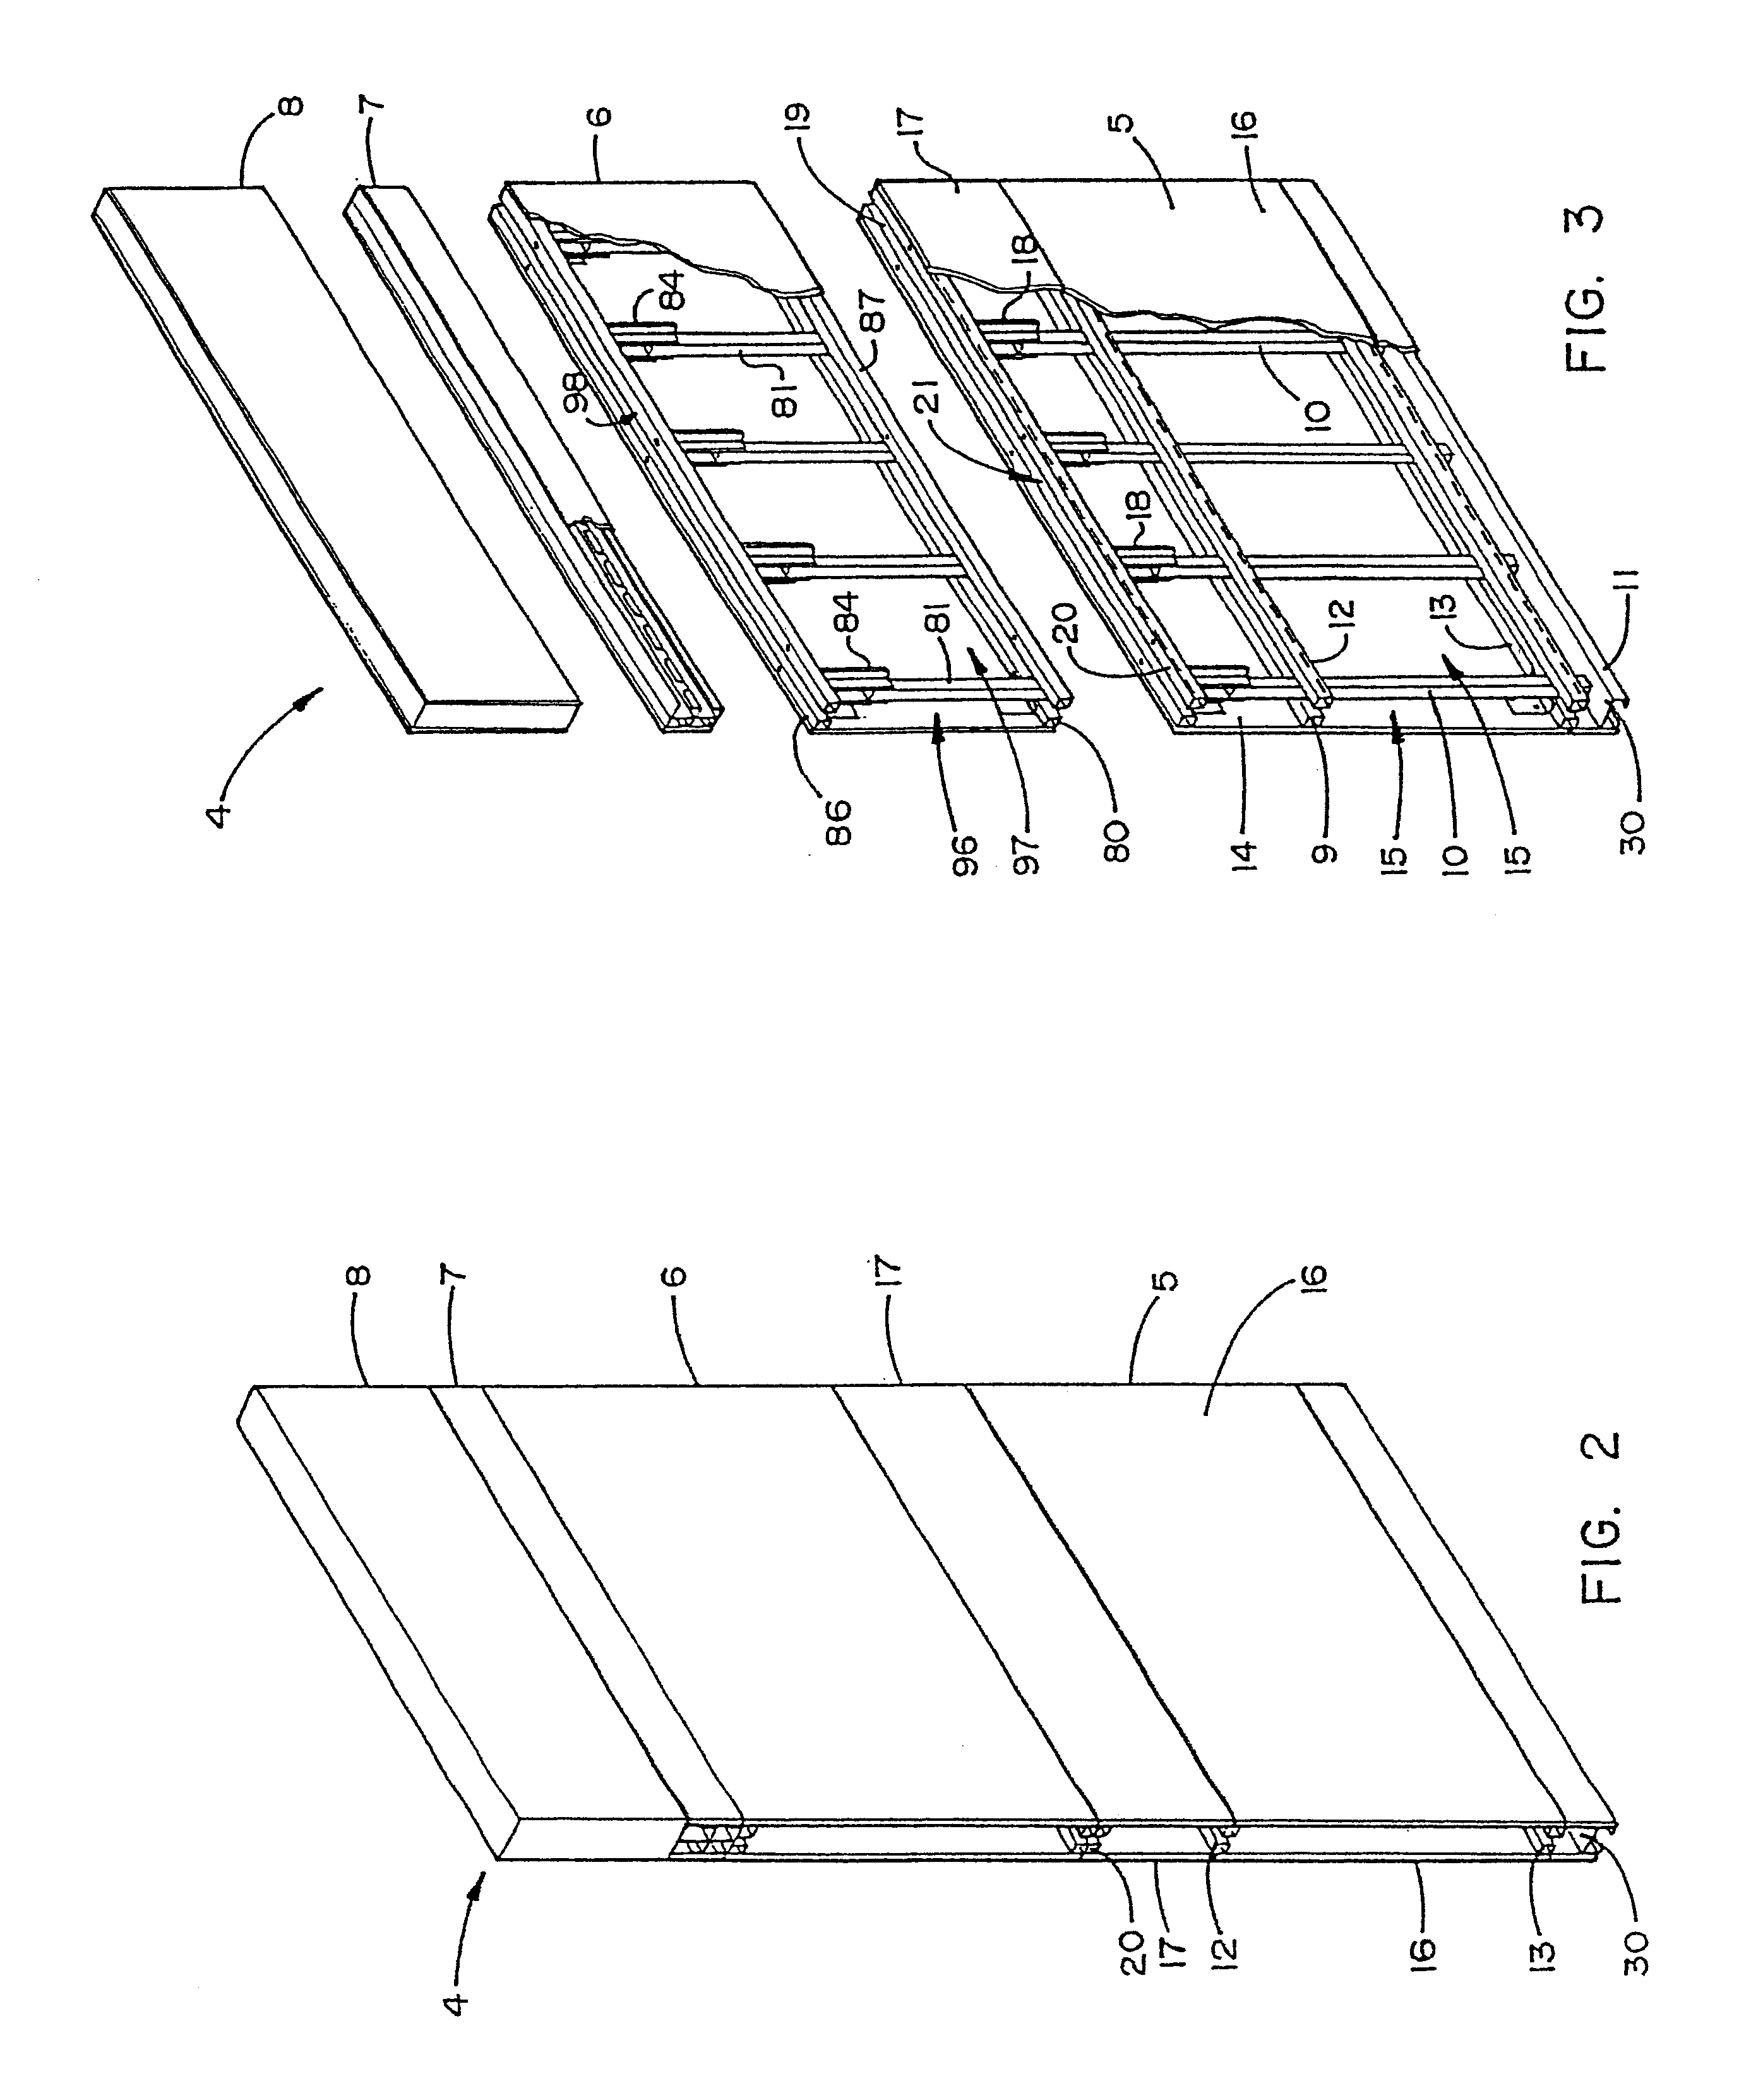 Method of connecting partition panels